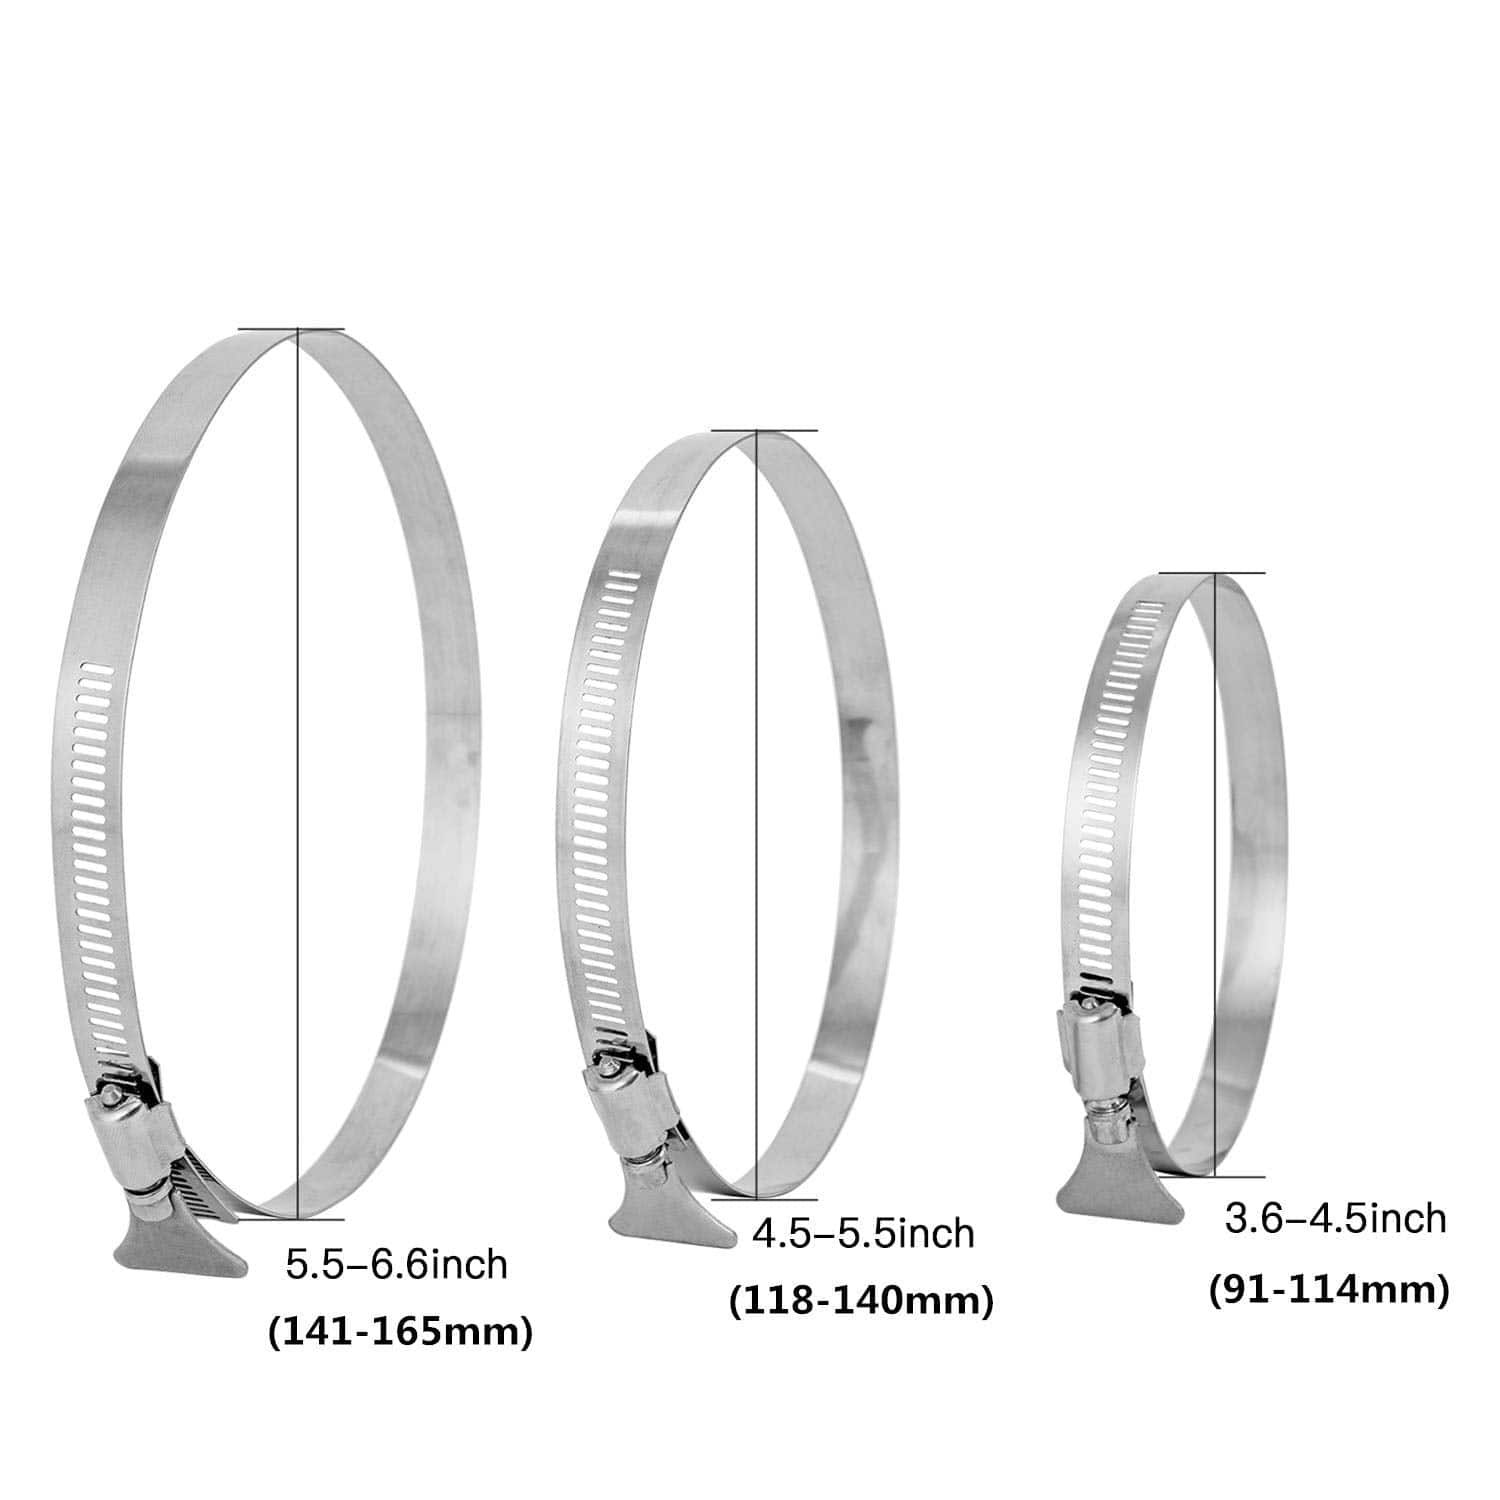 dryer hose clamps